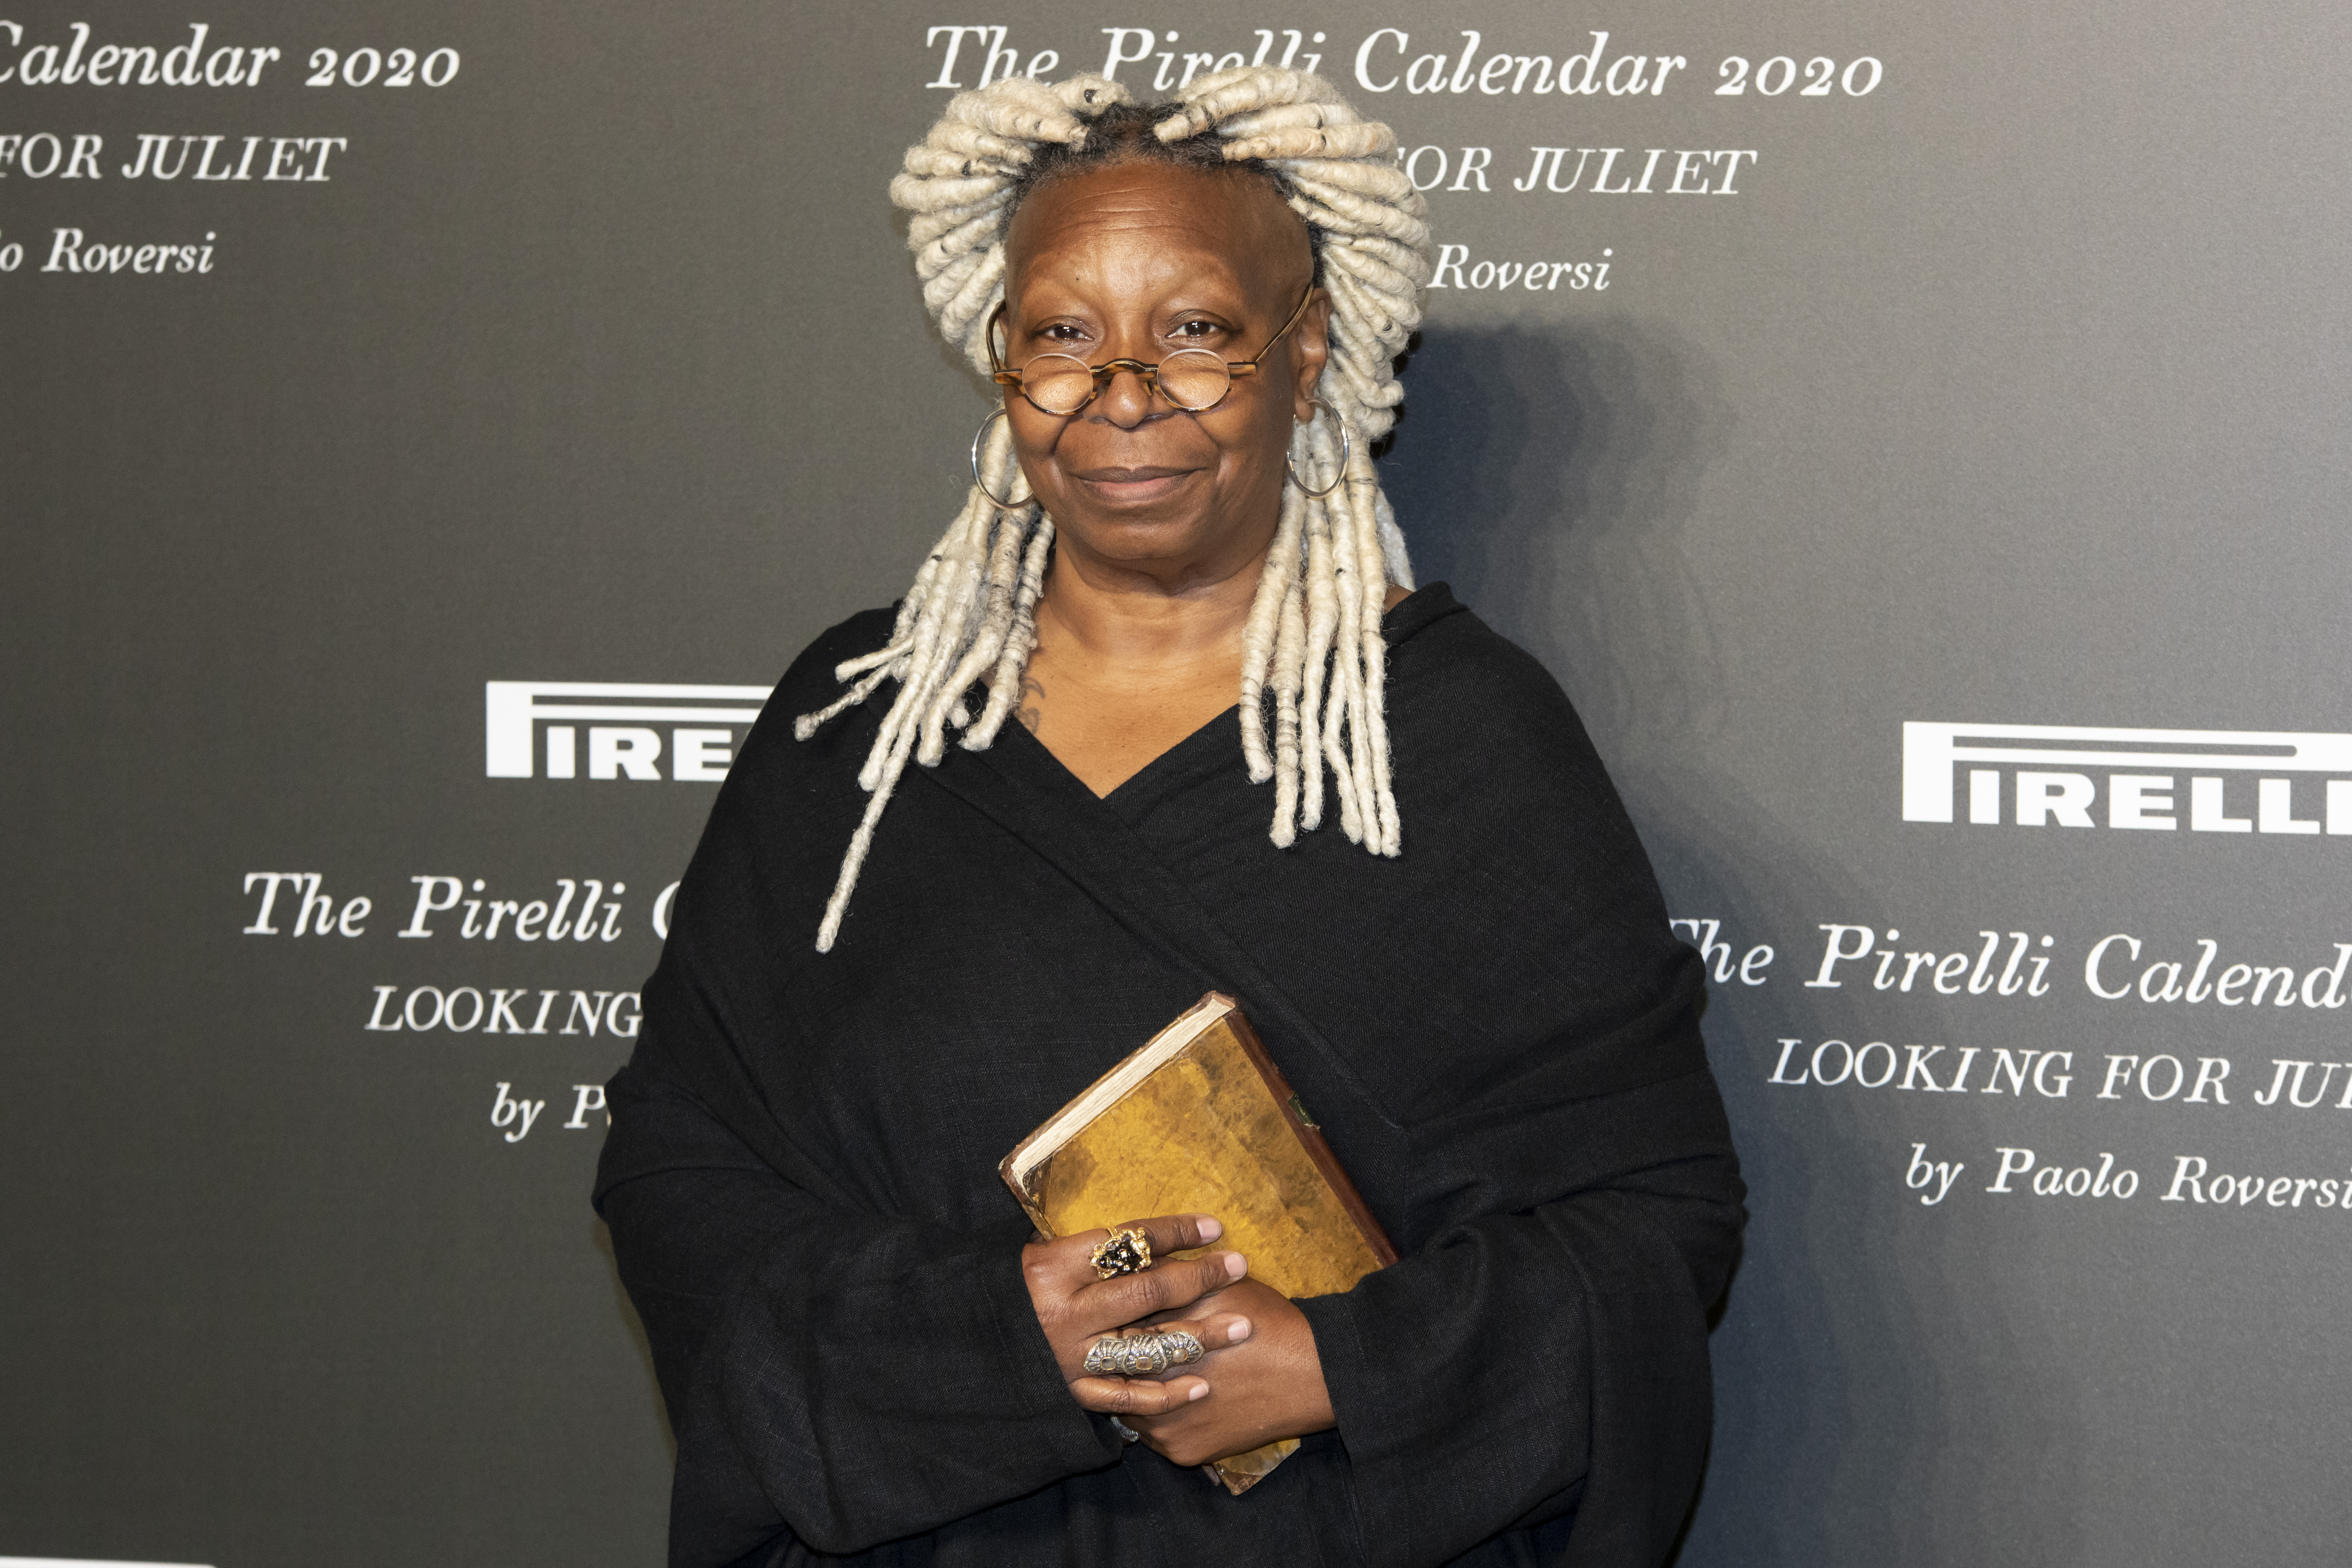 Whoopi Goldberg attends the presentation of the Pirelli 2020 Calendar at the Verona Philharmonic Theater on December 3, 2019, in Verona, Italy. | Source: Getty Images